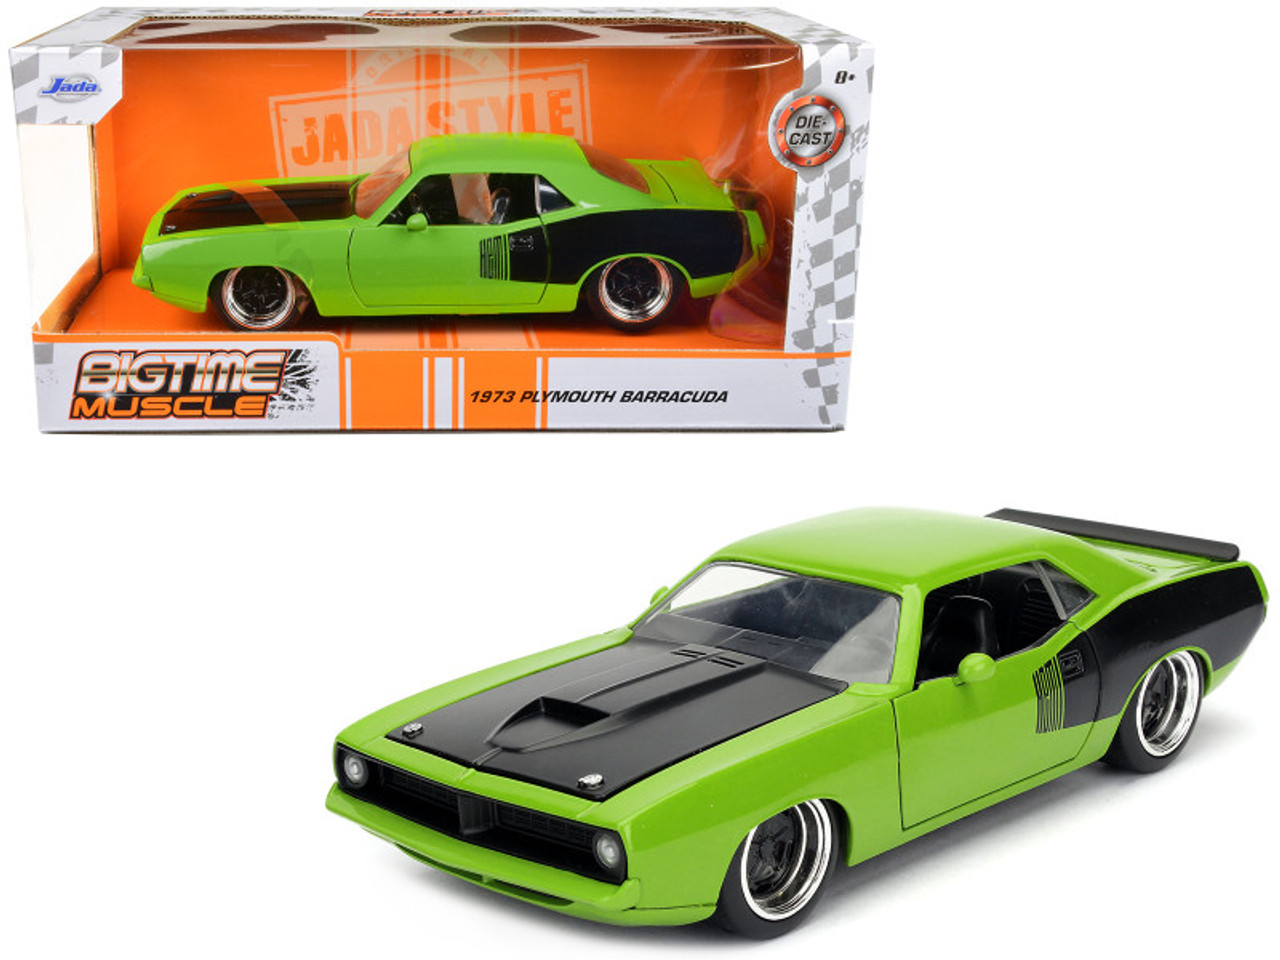 1973 Plymouth Barracuda Green Big Time Muscle 1/24 Diecast Model